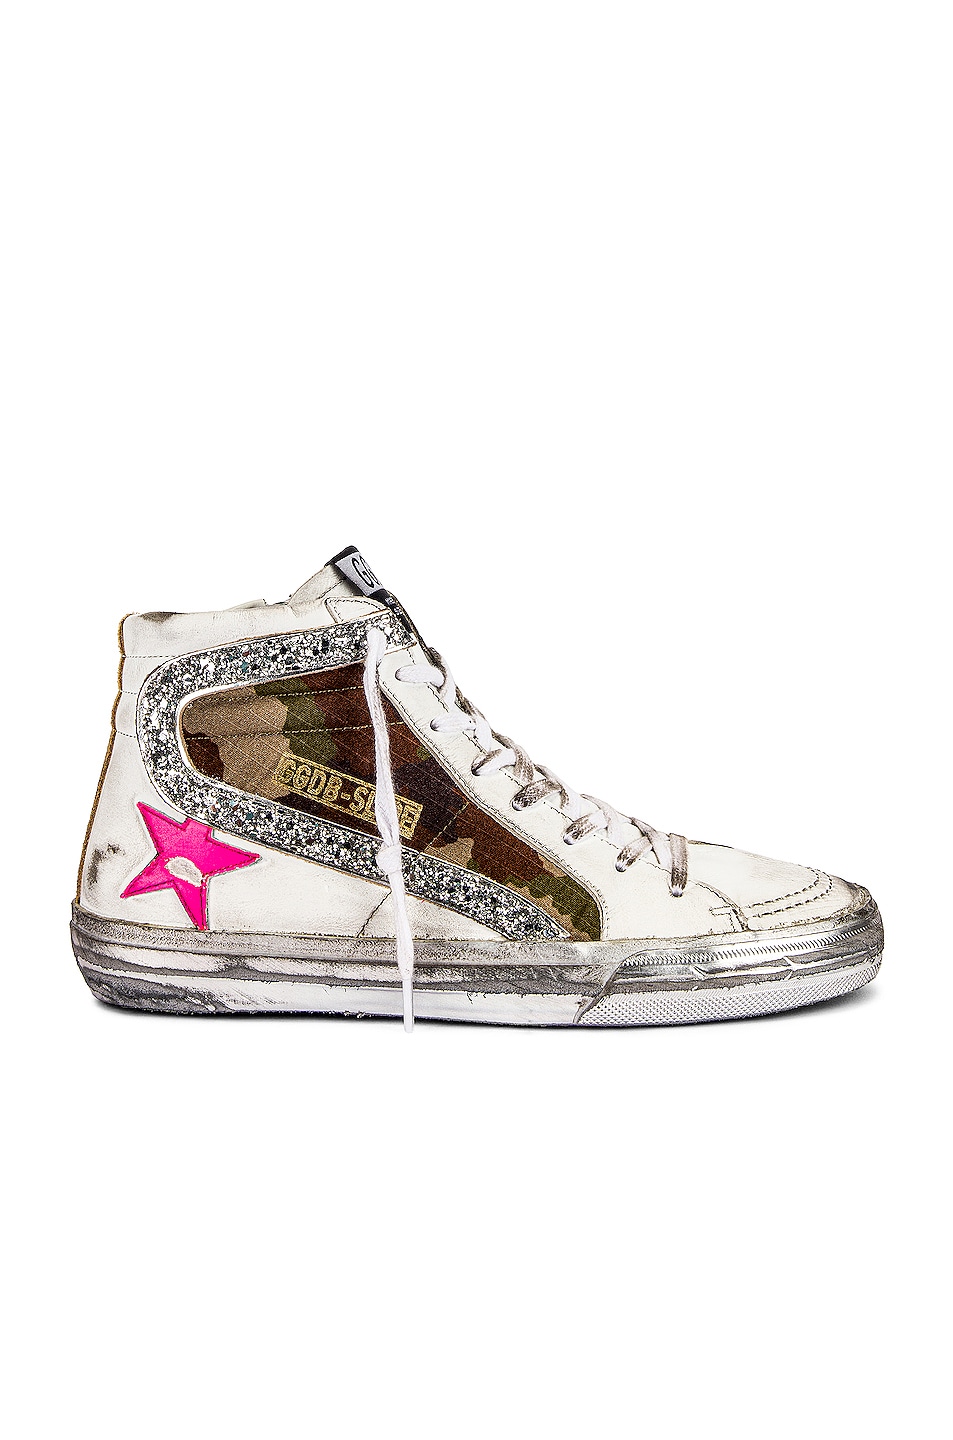 Image 1 of Golden Goose Slide Sneaker in White, Green Camouflage, Silver, Fluorescent Pink, & Cappuccino